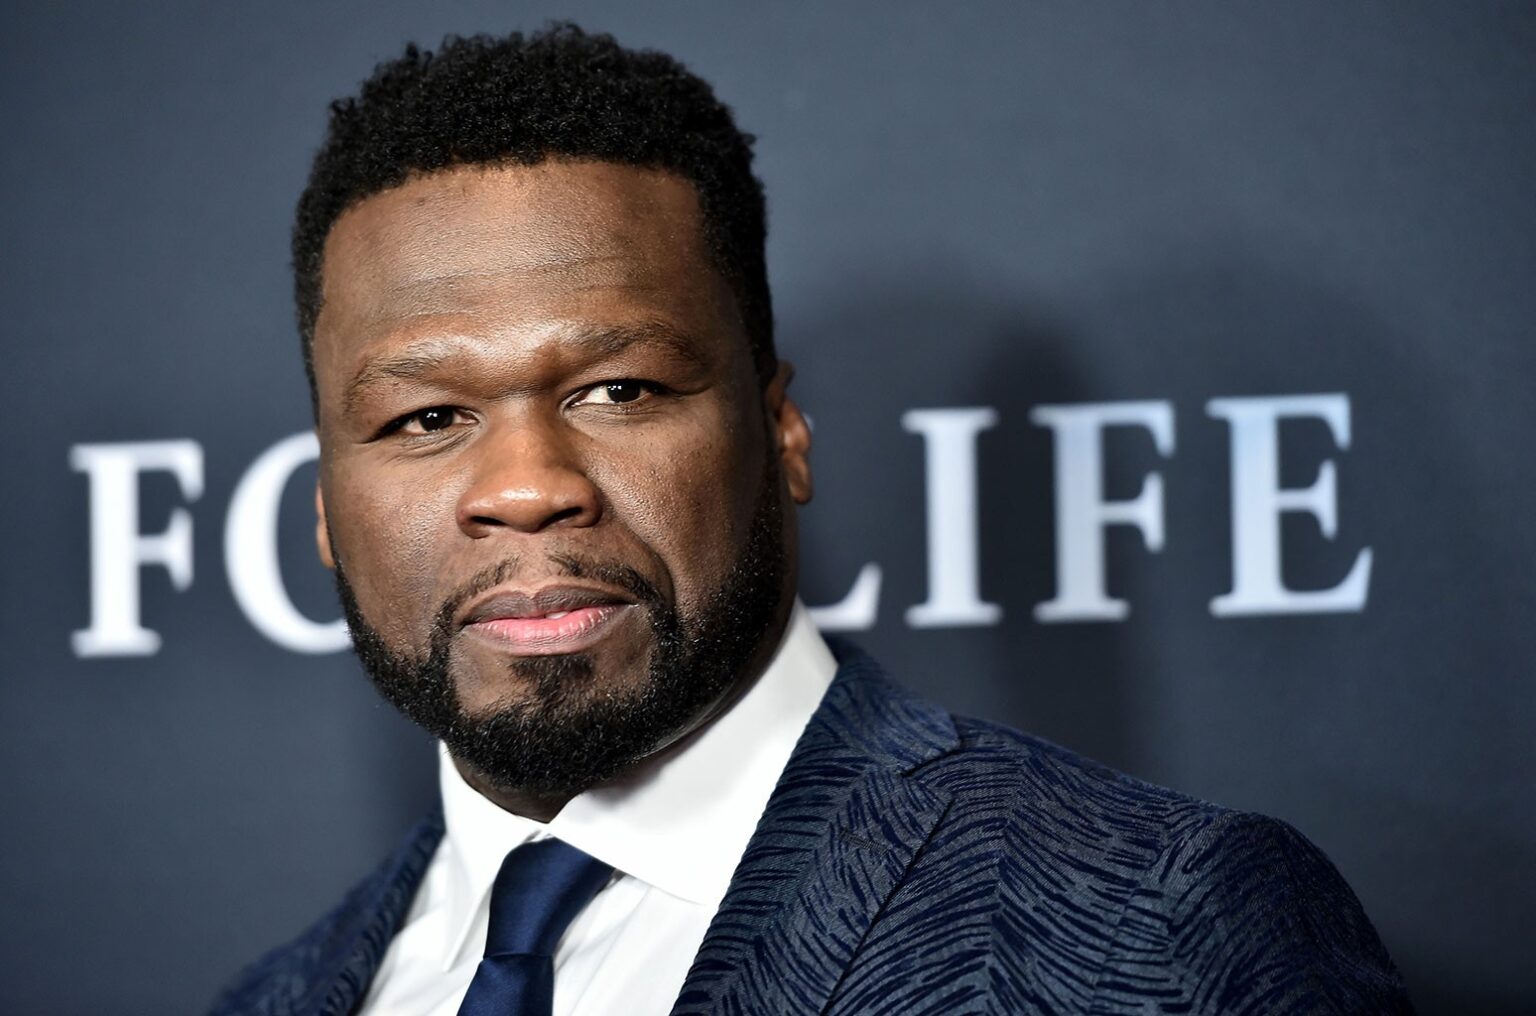 How much does a 50 Cent worth in 2021?